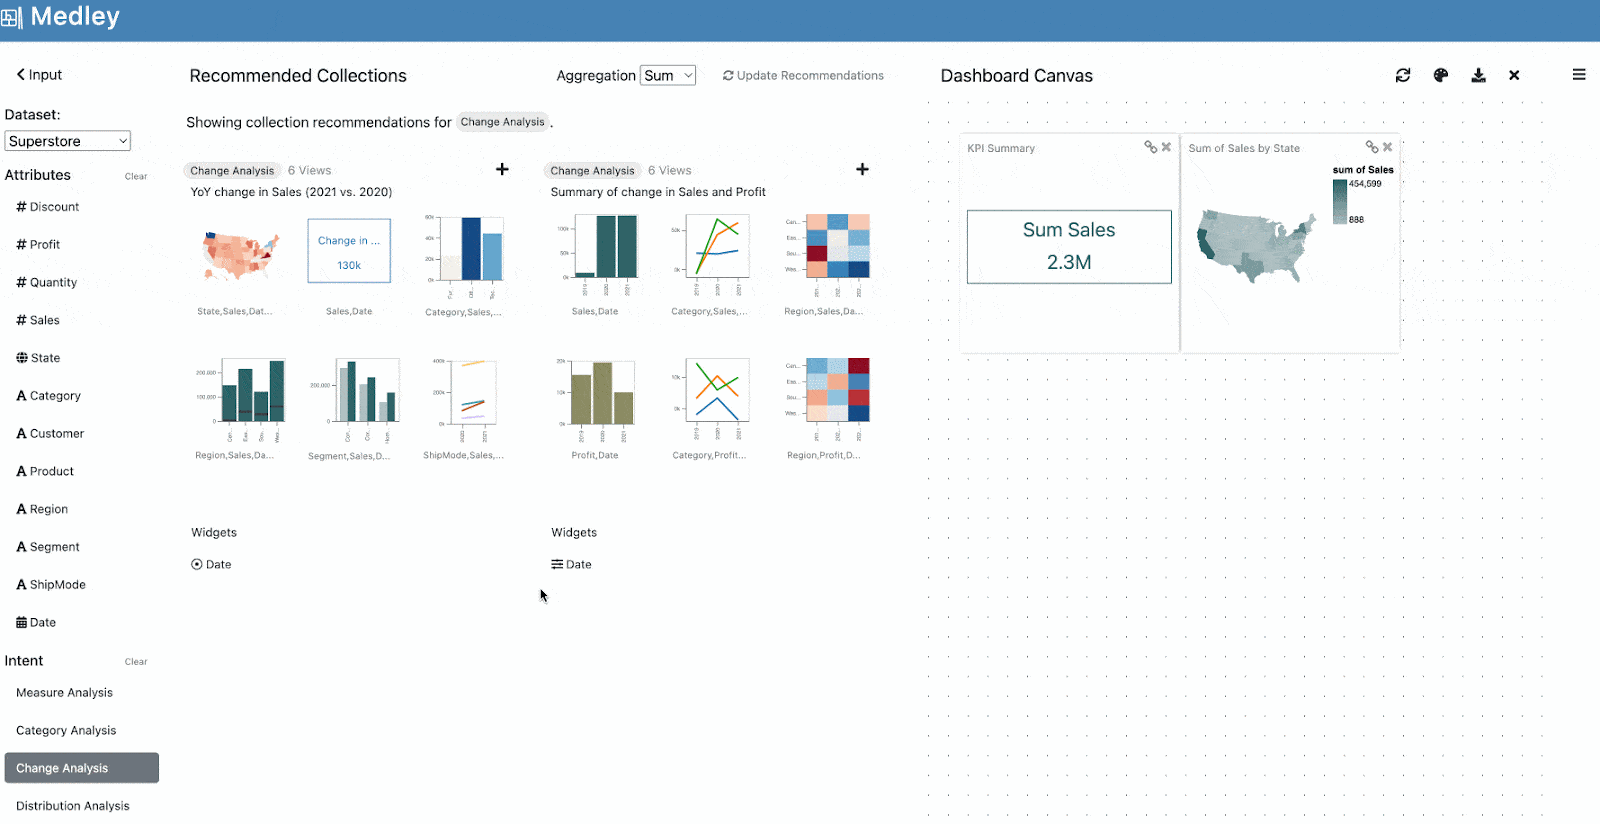 GIF showing collections updated to focus on the Profit attribute (instead of Sales) as the Profit attribute is selected in the input panel. Two views displaying the yearly changes in Profit are added to the canvas along with a year picker widget to interactively select the focus year in the dashboard.